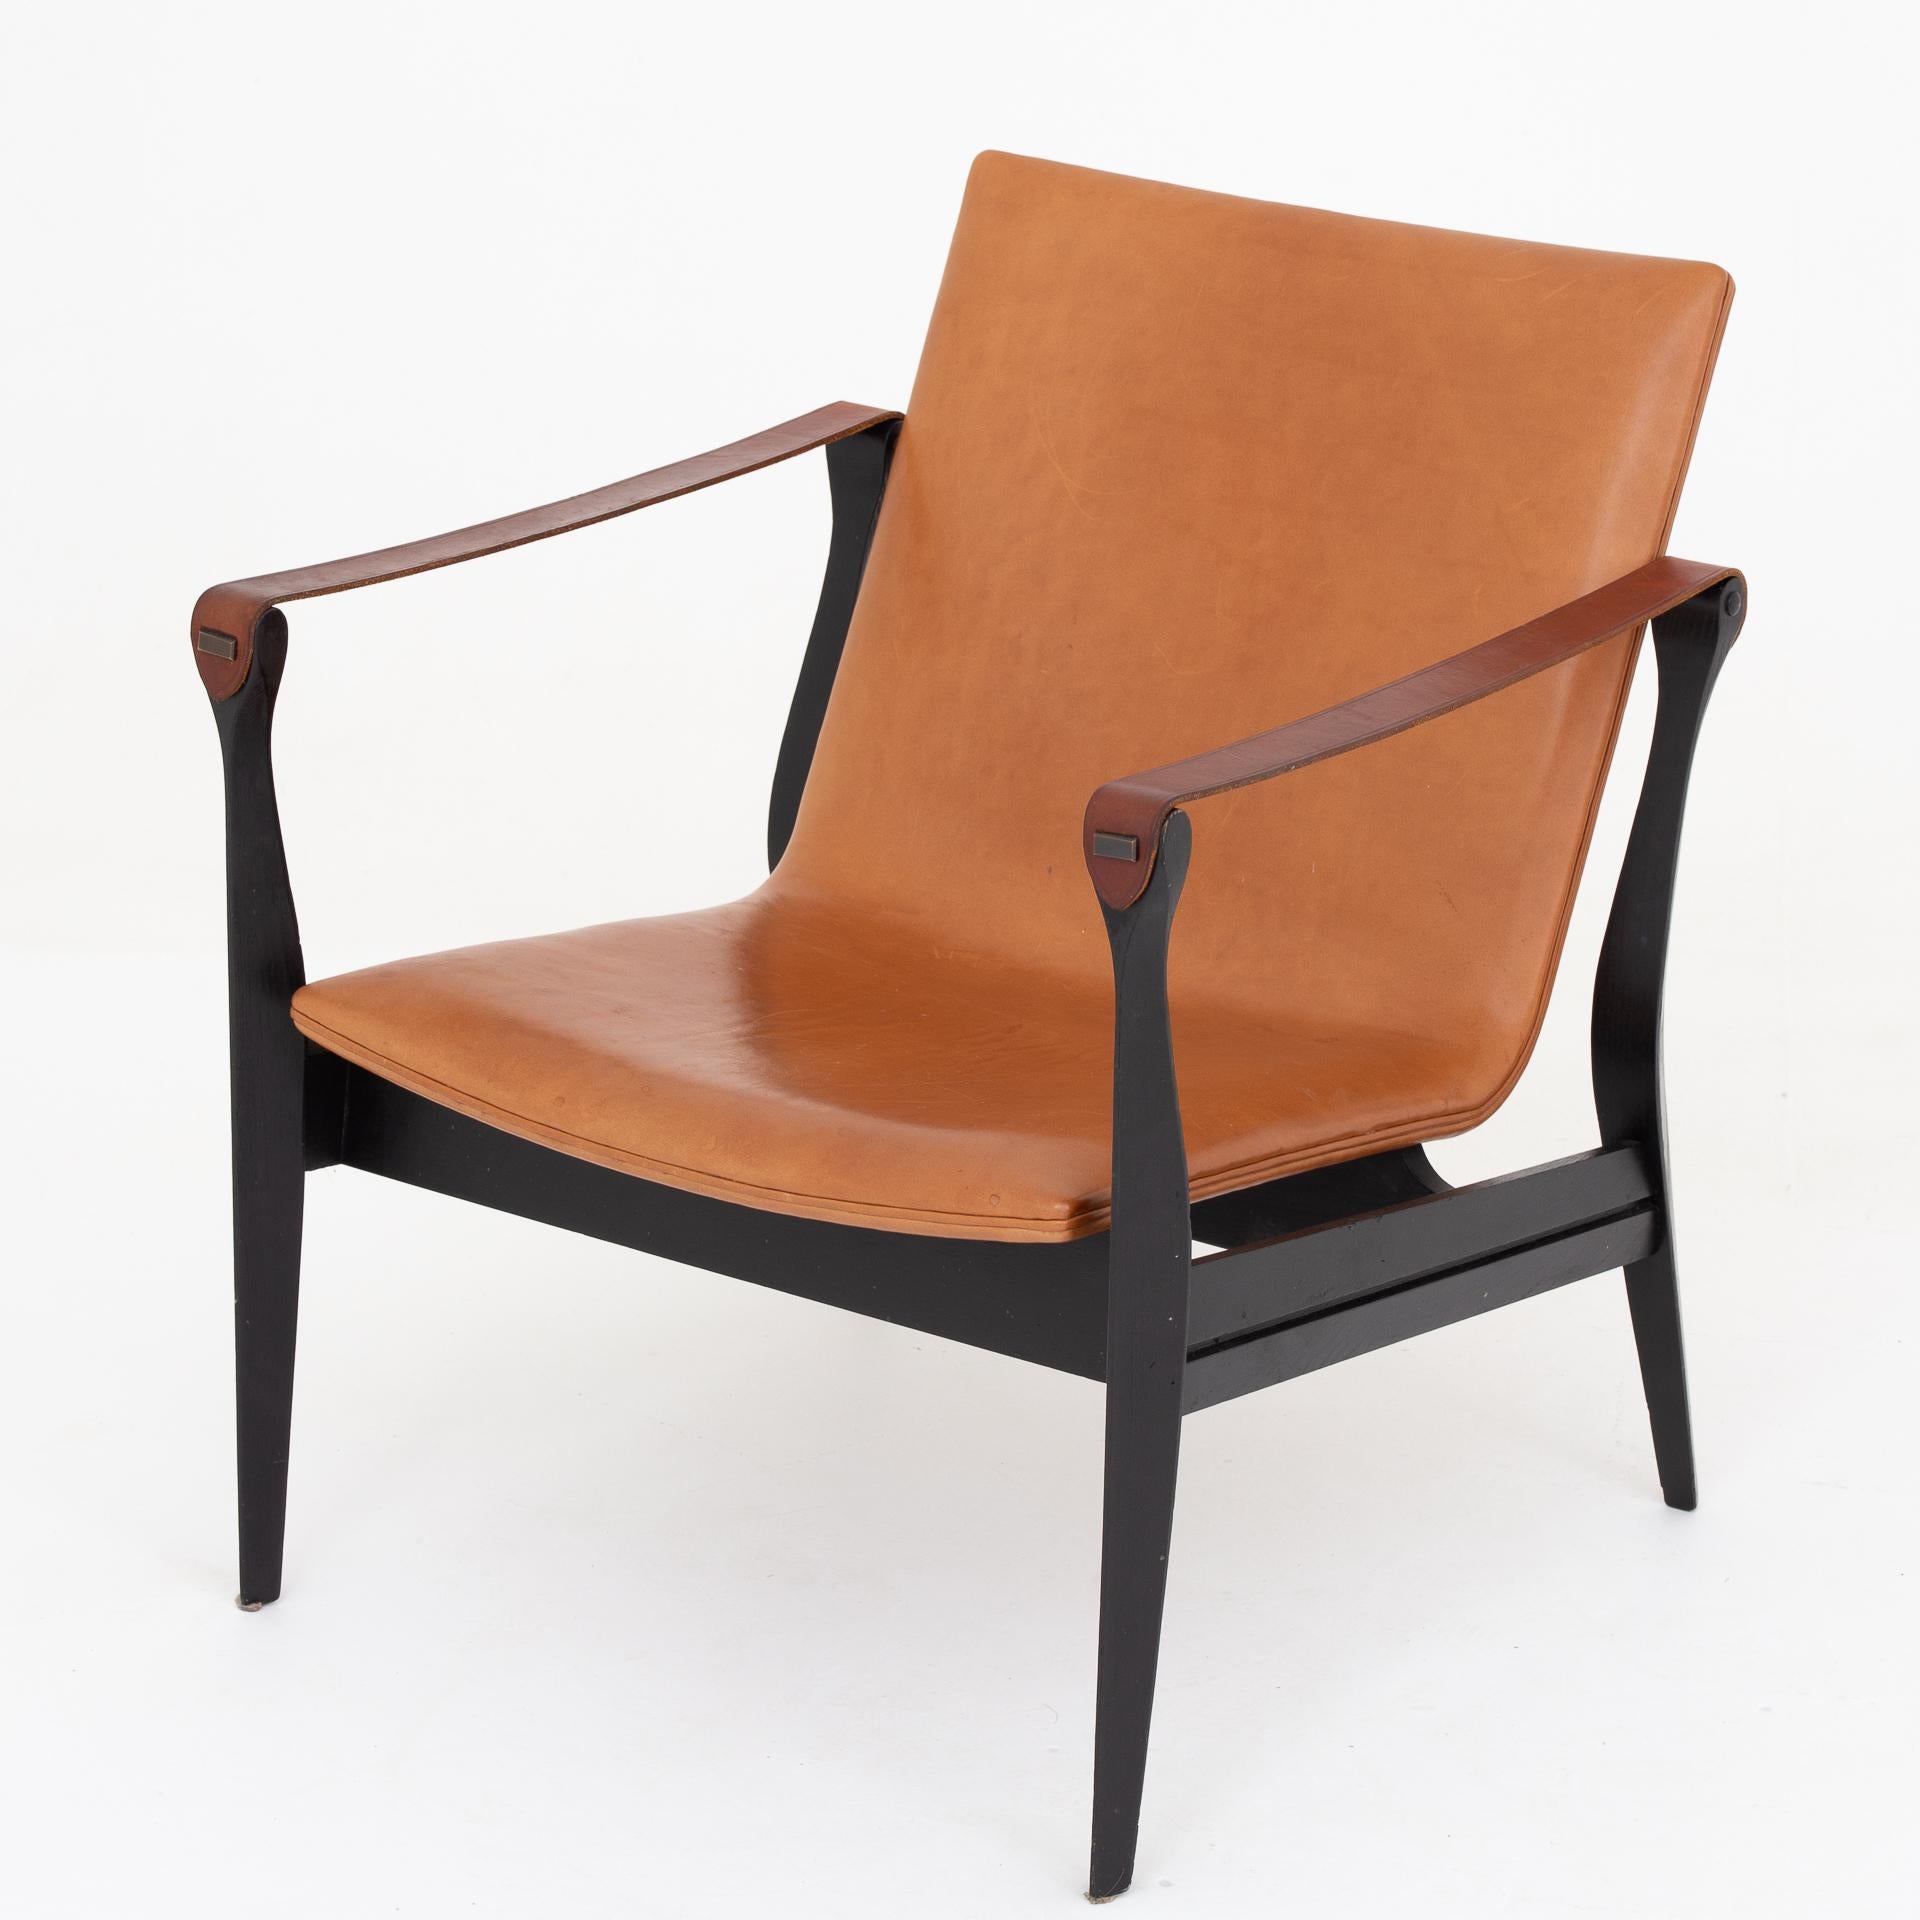 Model 4305, Safari chair in black ash with patinated cognac-colored leather. Maker Fritz Hansen.